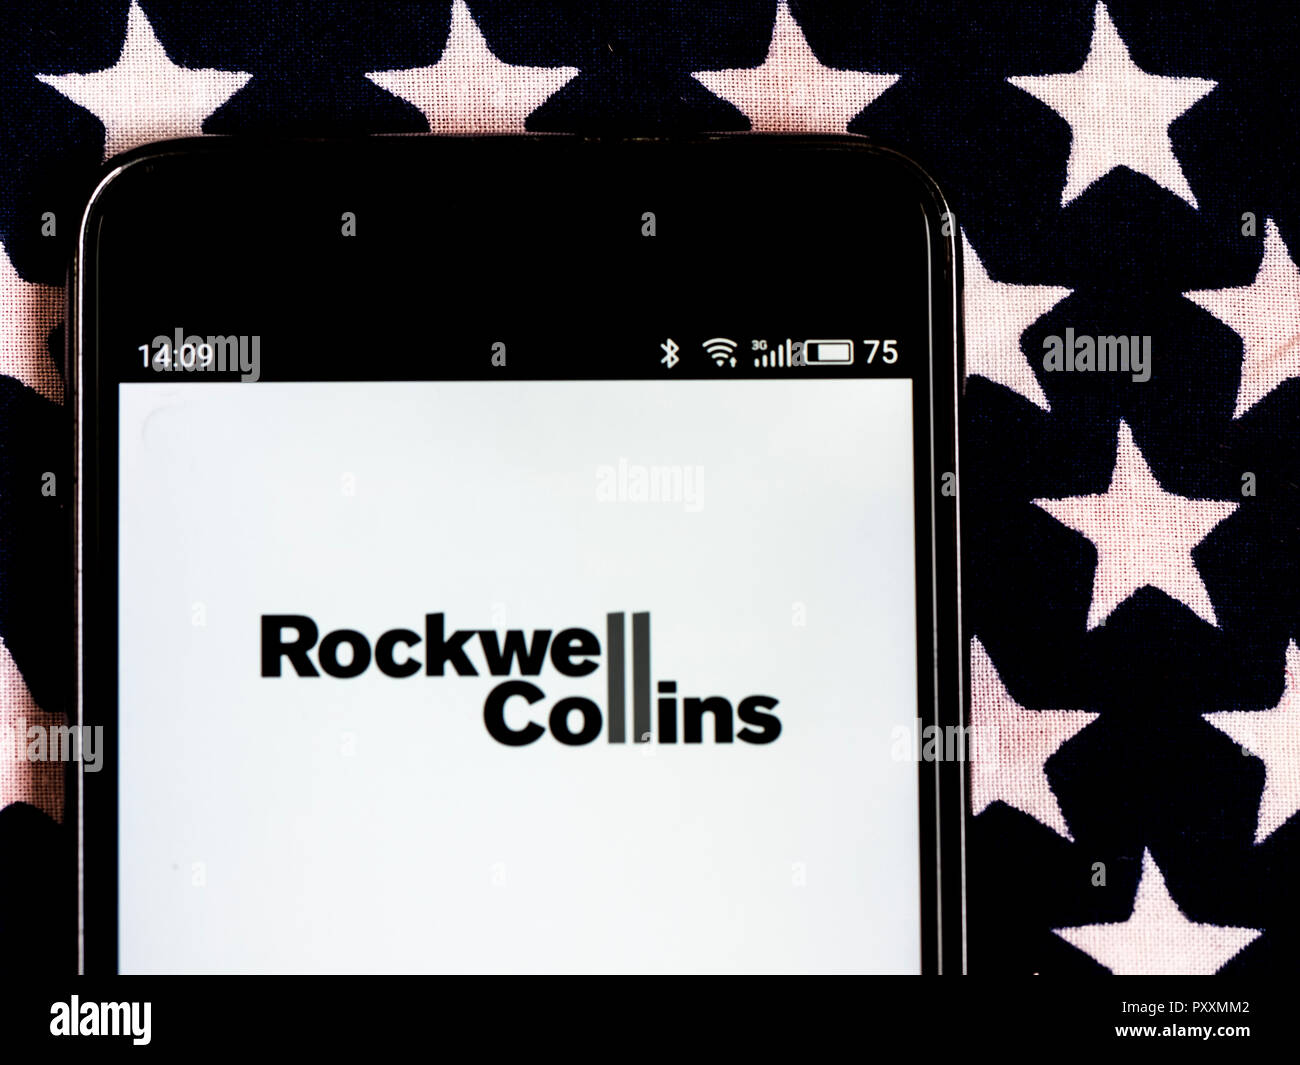 Rockwell Collins Company logo seen displayed on smart phone. Rockwell Collins, Inc. is an American multinational company headquartered in Cedar Rapids, Iowa providing avionics and information technology systems and services to government agencies and aircraft manufacturers. Stock Photo